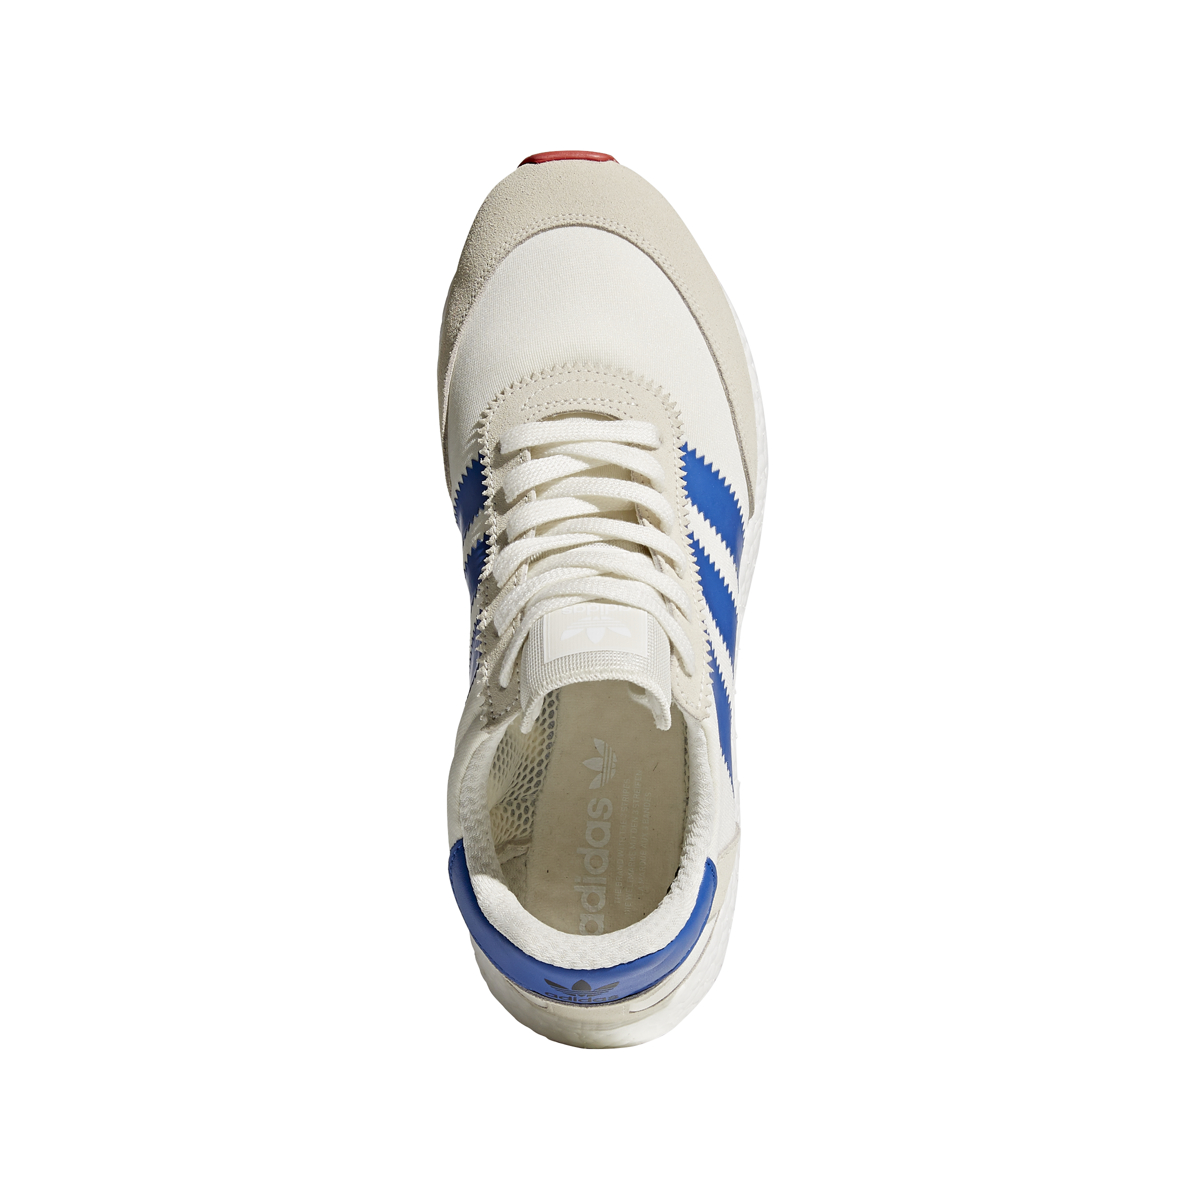 adidas i 5923 off white blue red